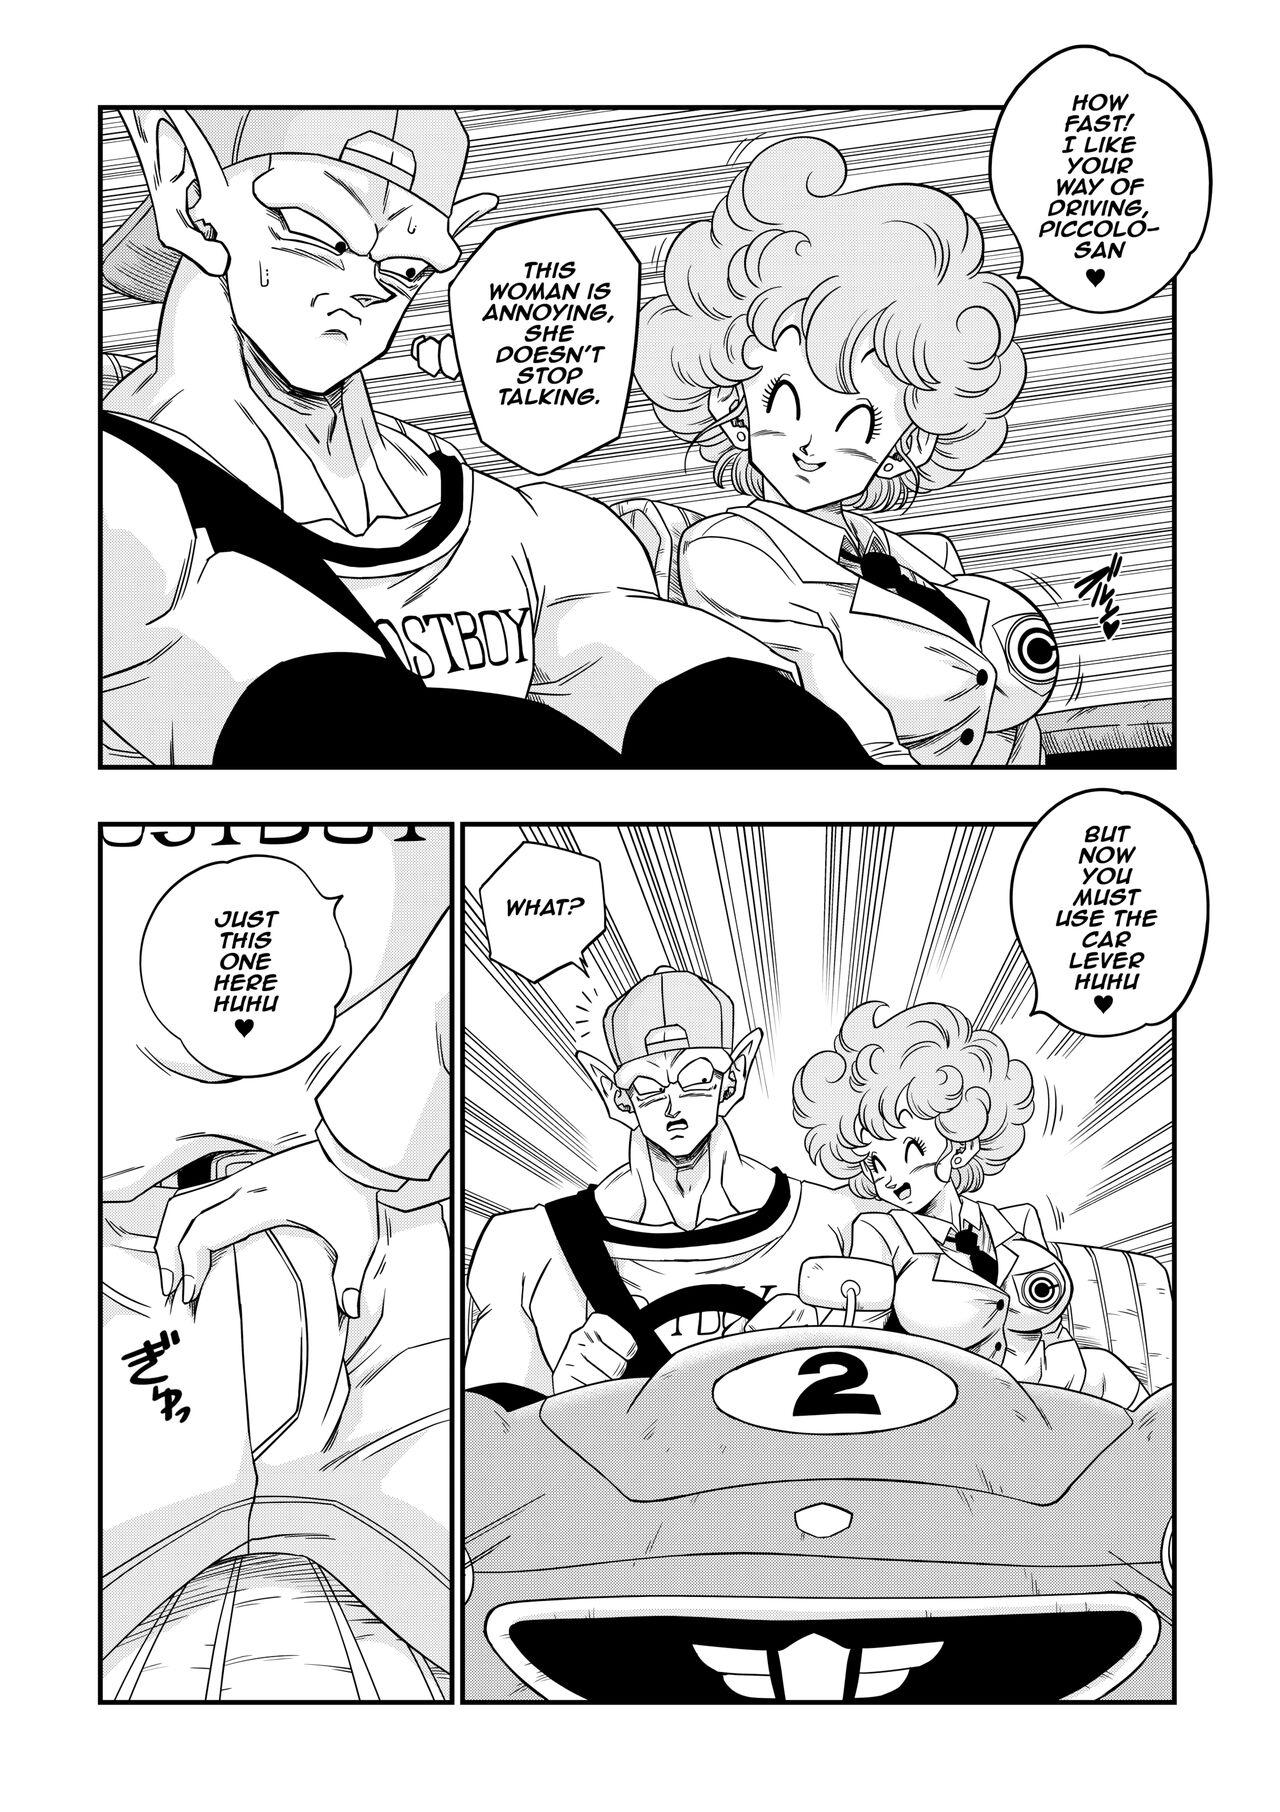 One Burning Road - Dragon ball z Dragon ball Gaygroupsex - Page 5